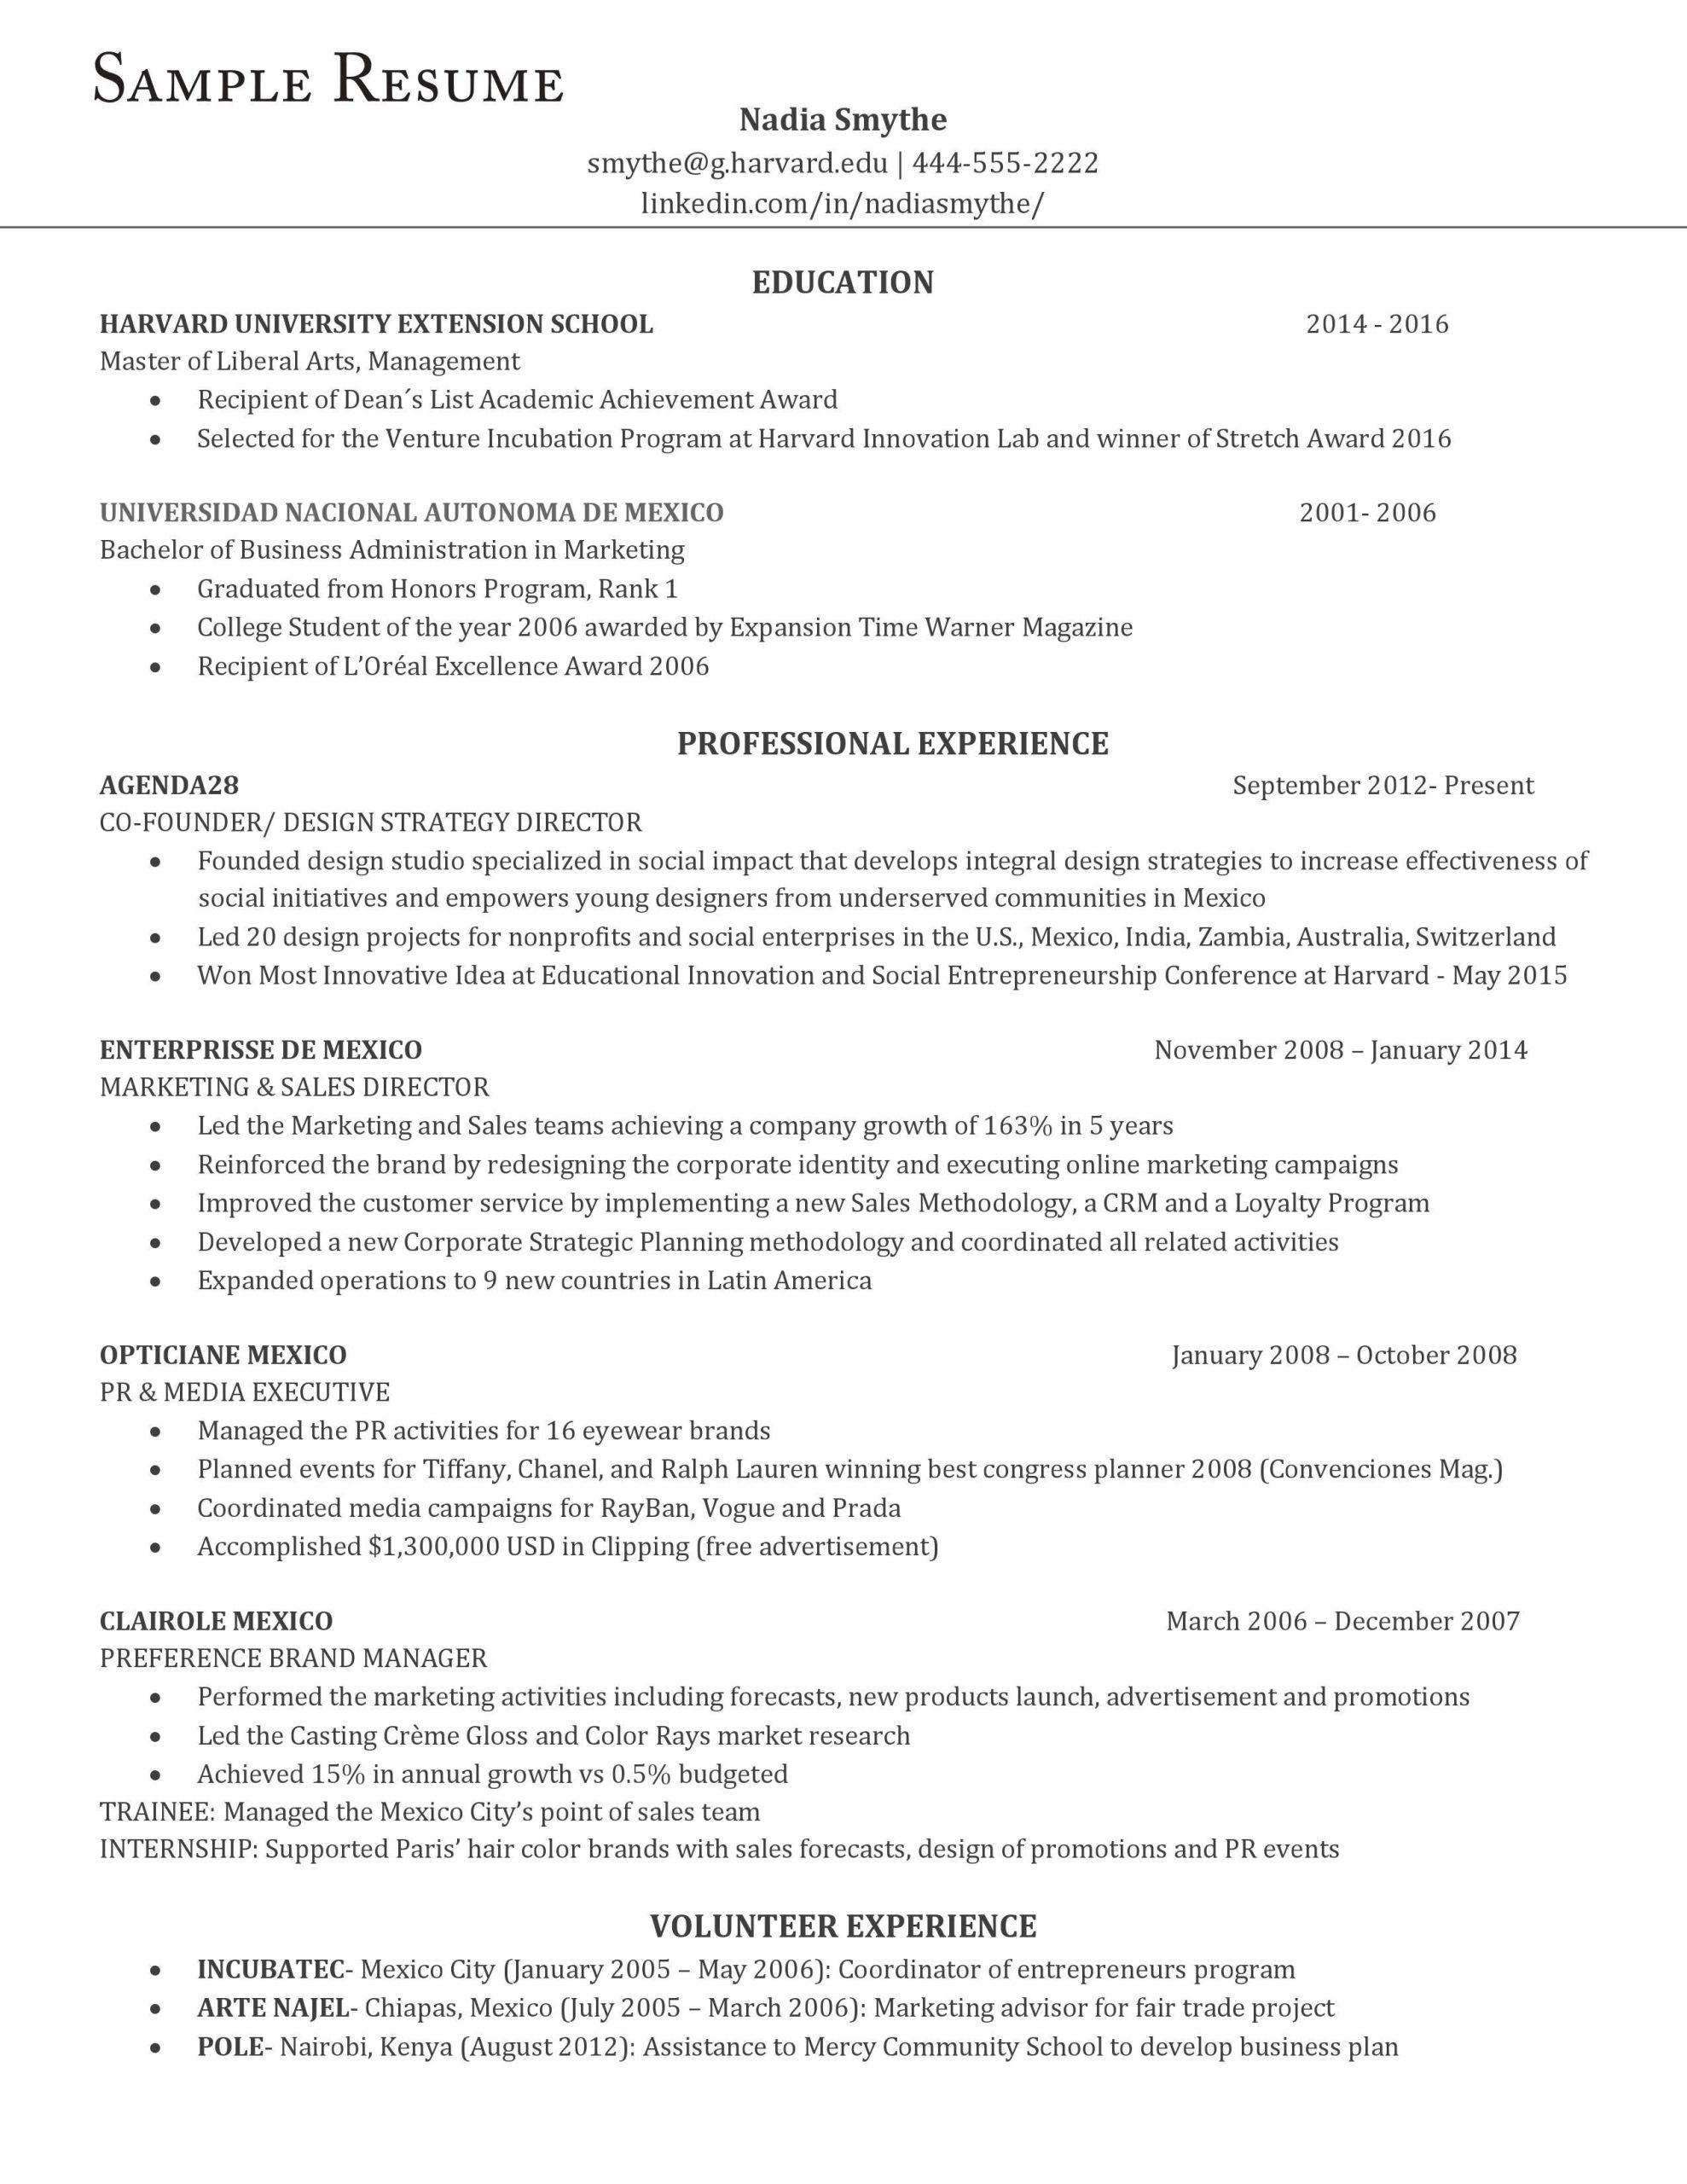 Resume for Masters Application Sample Harvard Vasudha Chandak On Twitter: “here’s An Example Of the Perfect …